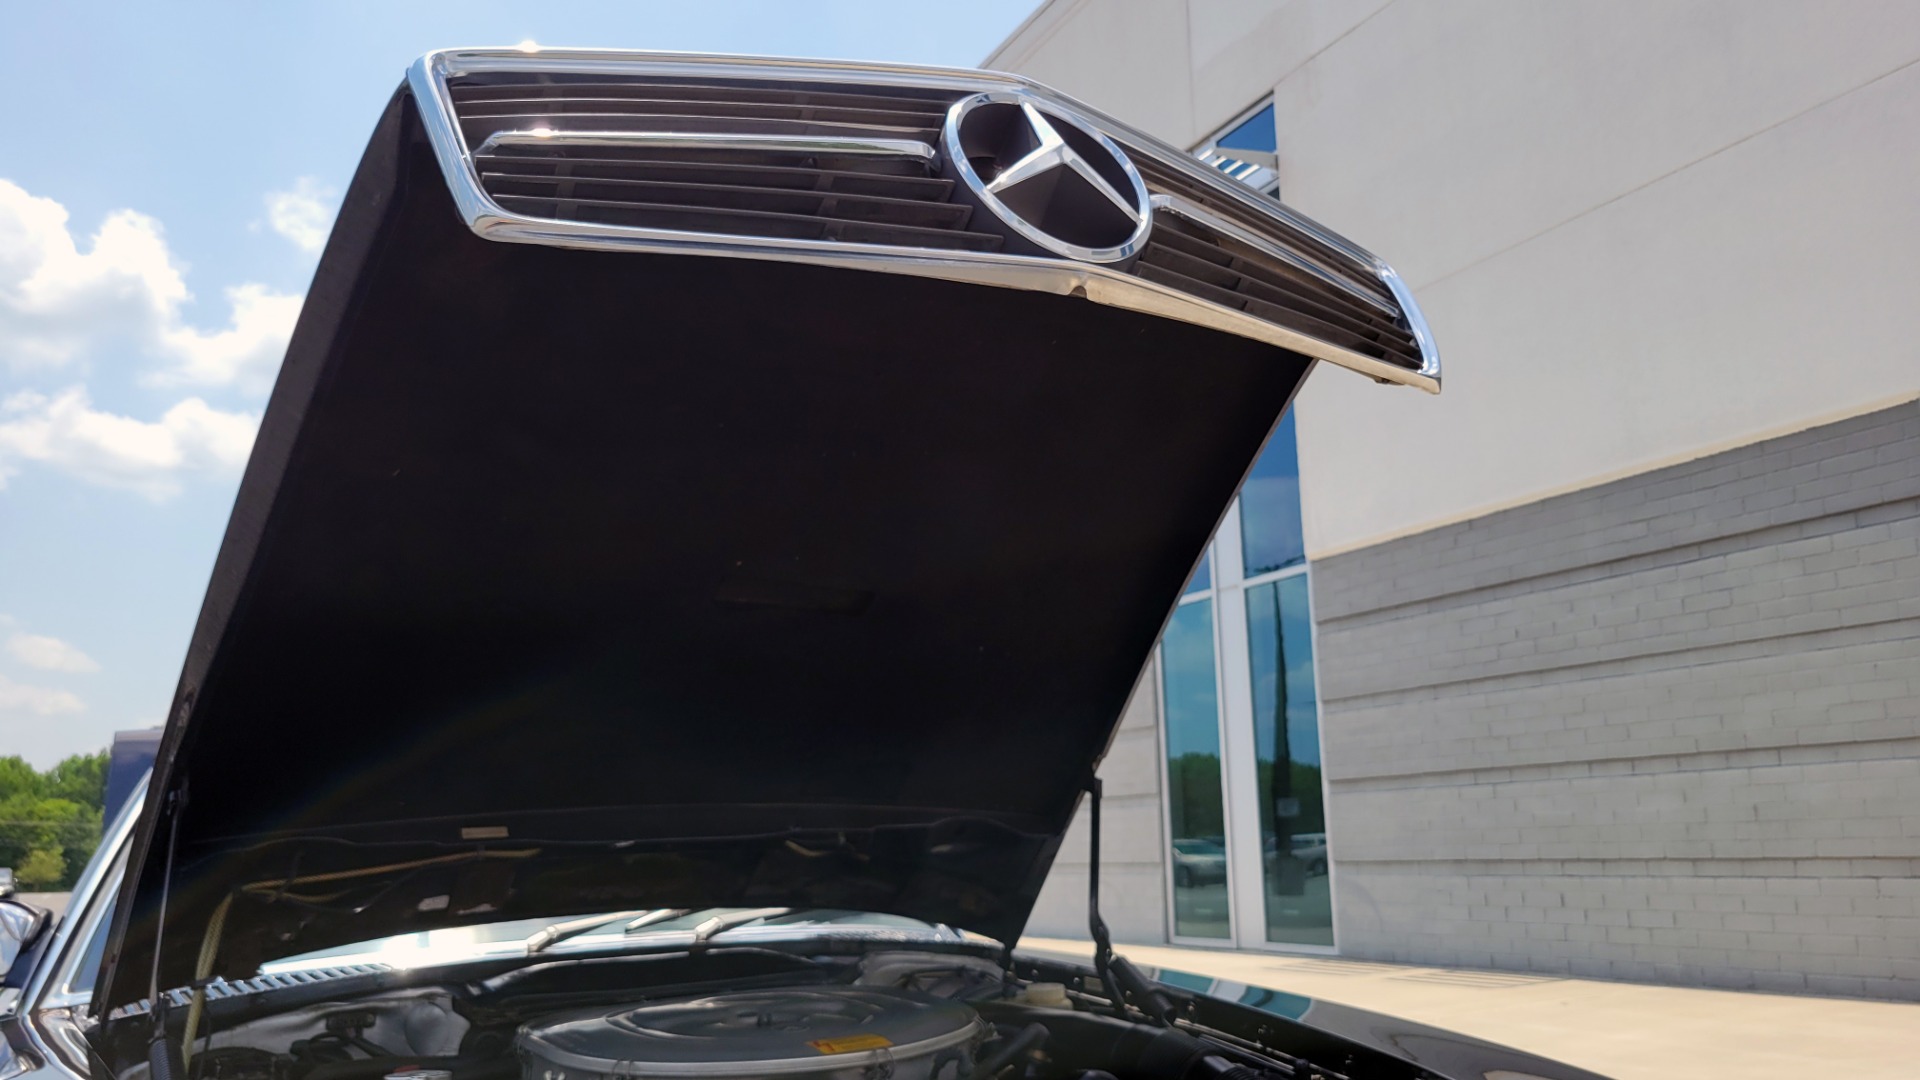 Used 1989 Mercedes-Benz 560 SERIES 560SL ROADSTER / 5.6L V8 227HP / AUTOMATIC TRANS for sale $24,999 at Formula Imports in Charlotte NC 28227 22